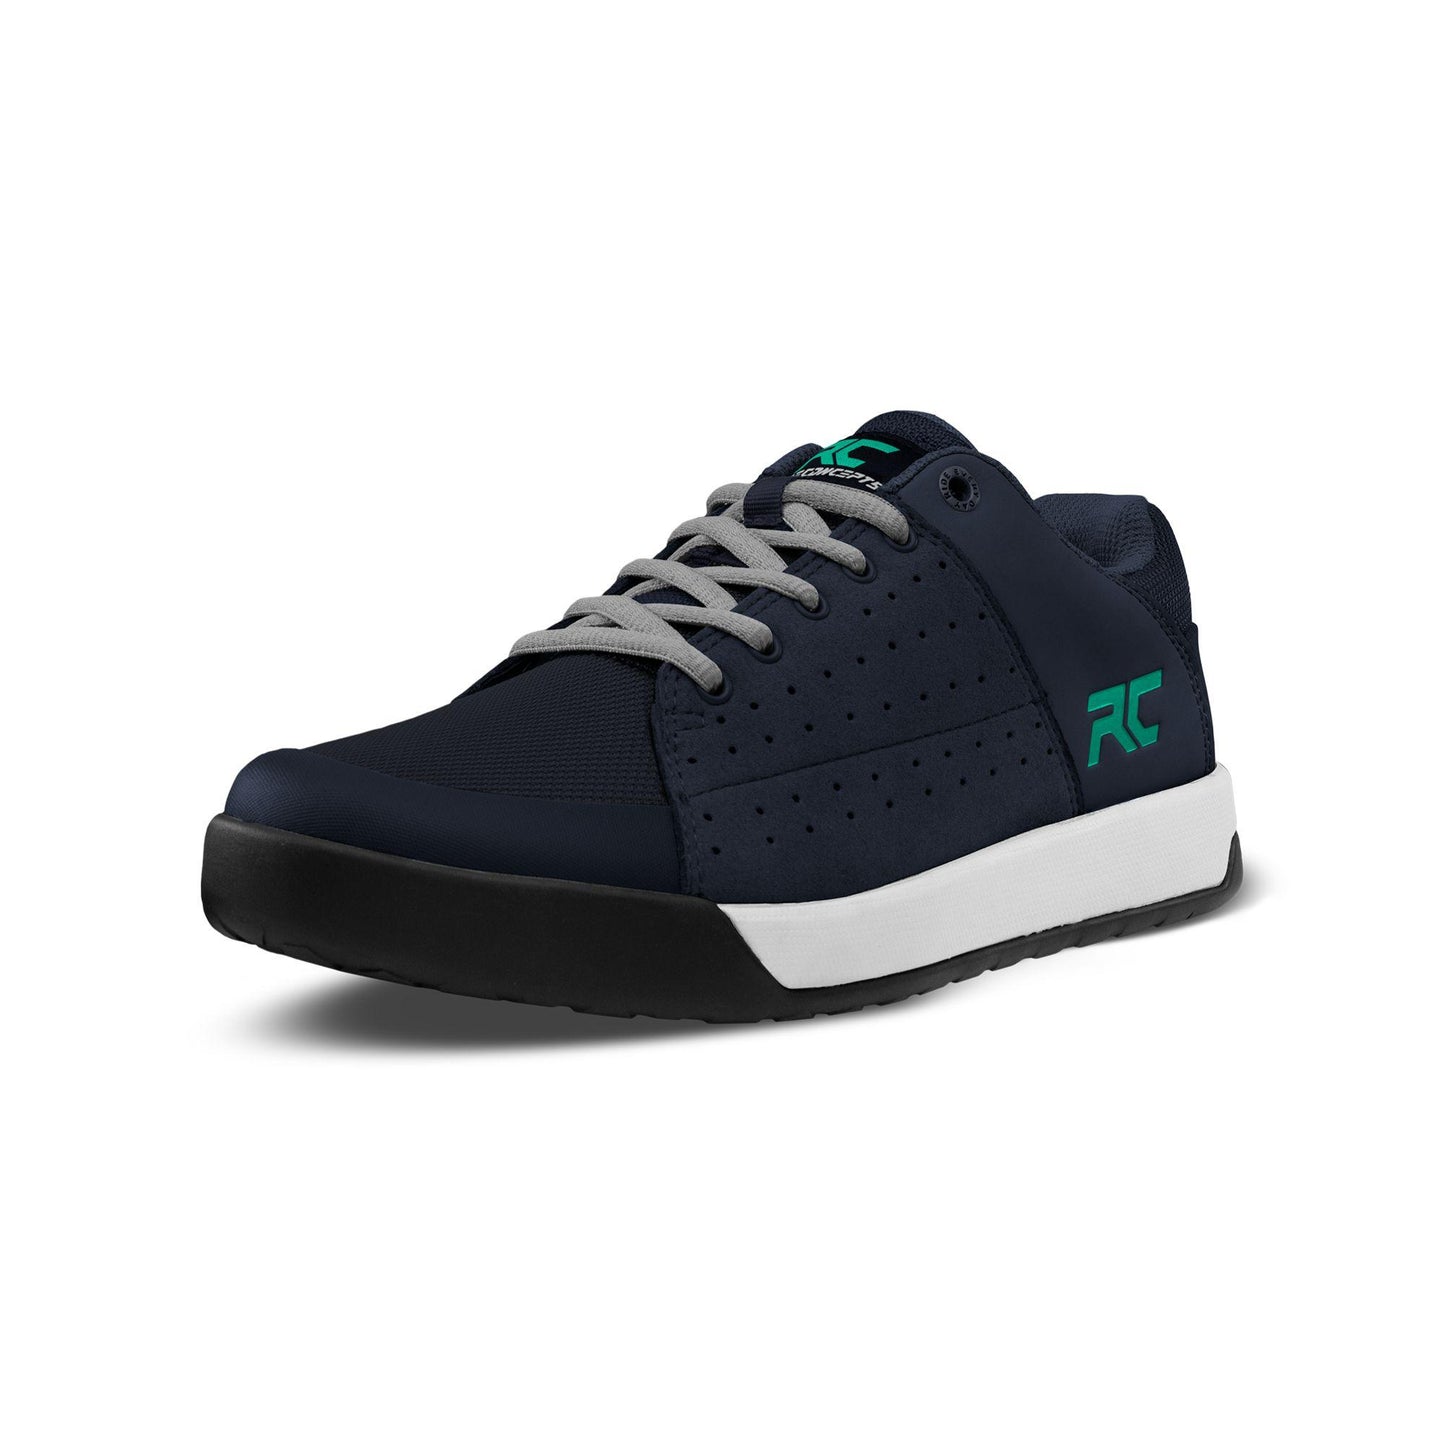 Ride Concepts Livewire Women's Shoes Navy / Teal